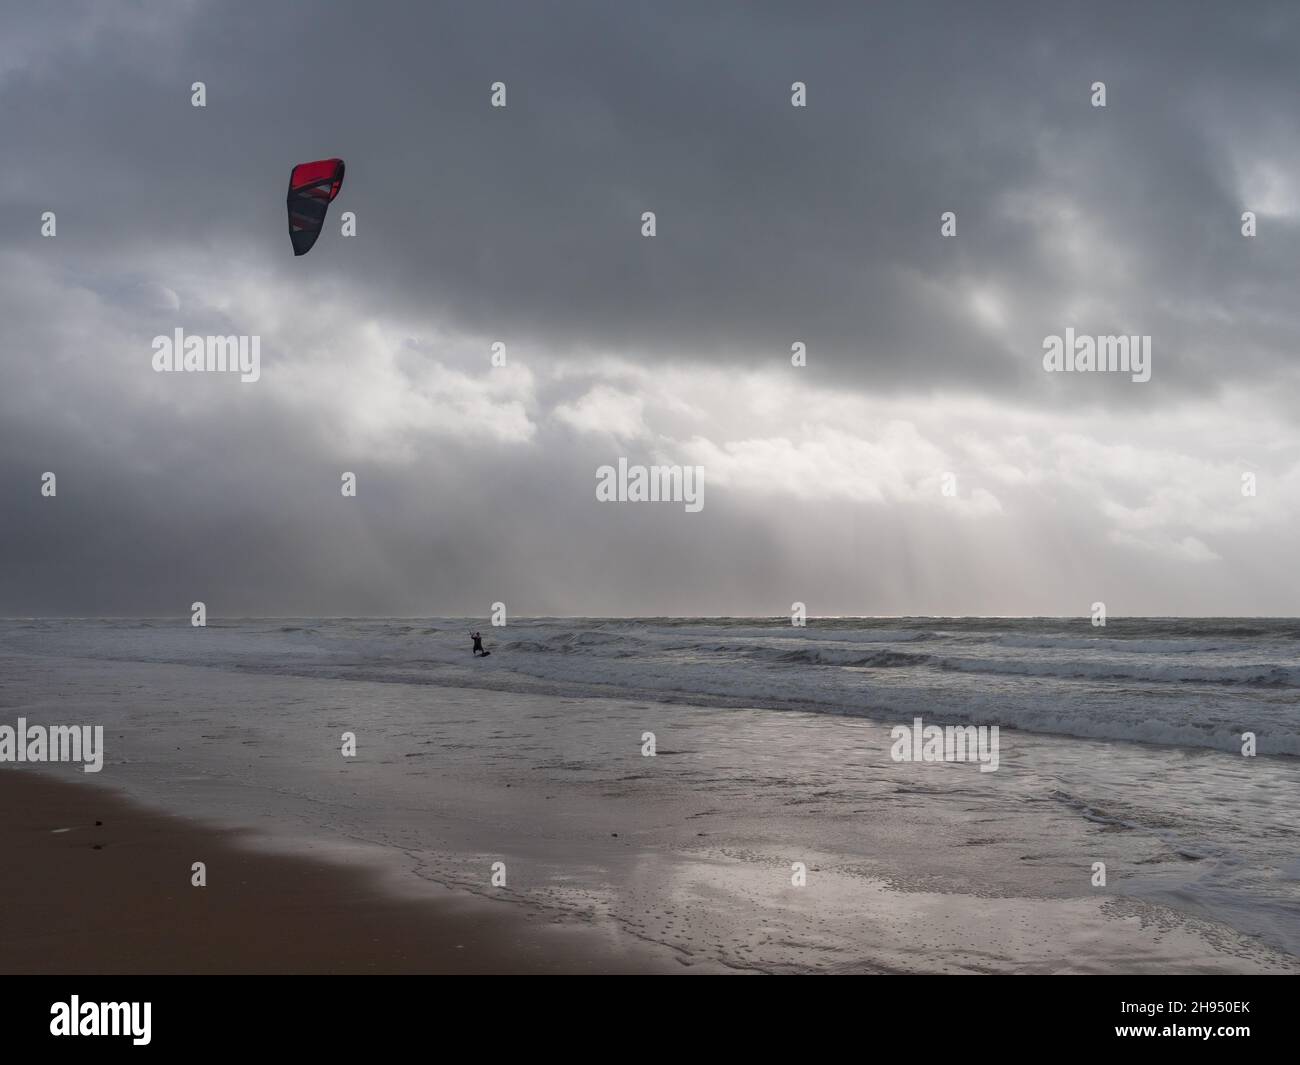 A kitesurfer surfing along the waves on a sandy beach against a cloudy and stormy sky in Wales Stock Photo